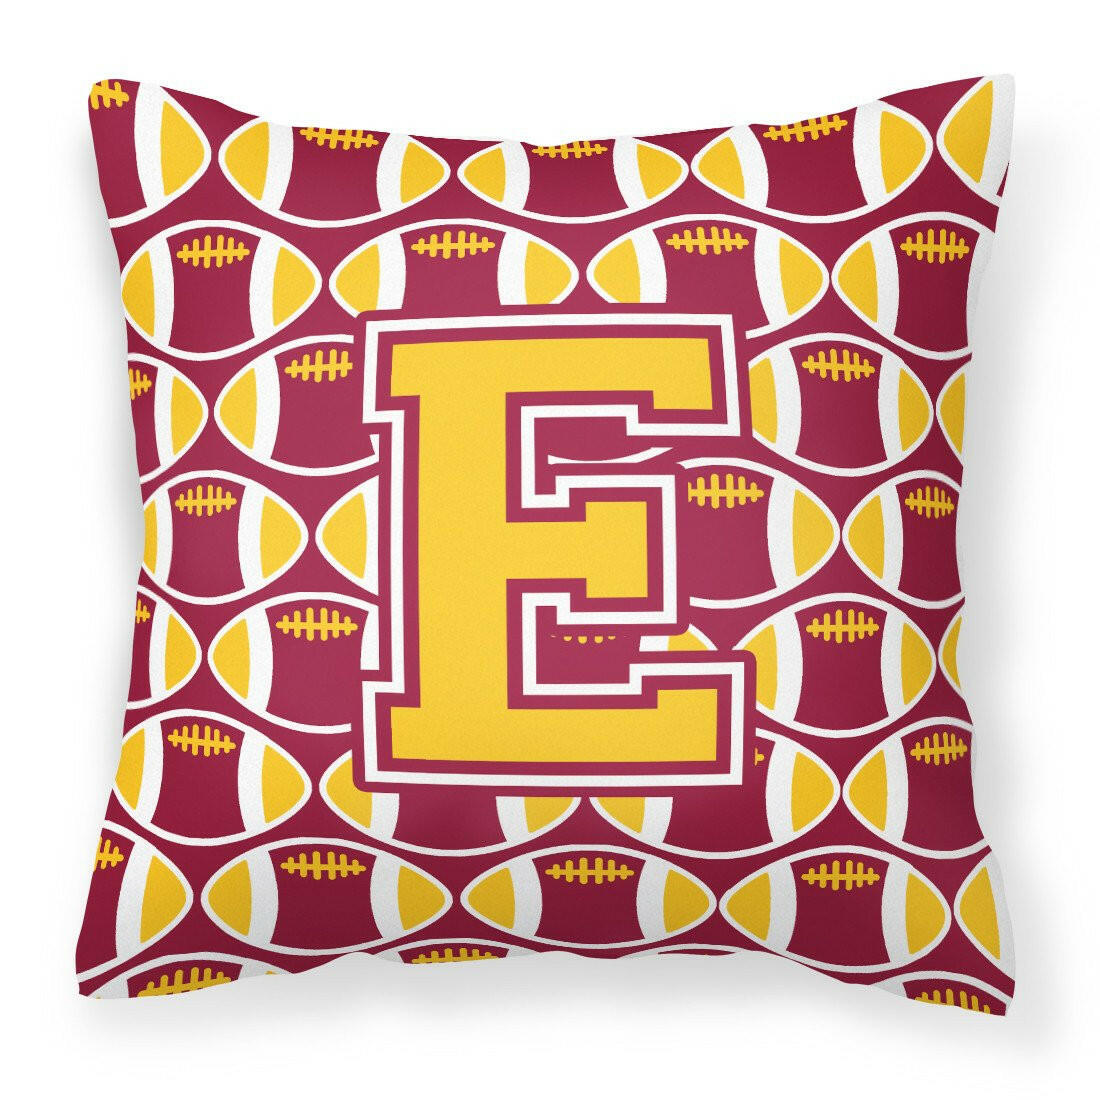 Letter E Football Maroon and Gold Fabric Decorative Pillow CJ1081-EPW1414 by Caroline's Treasures